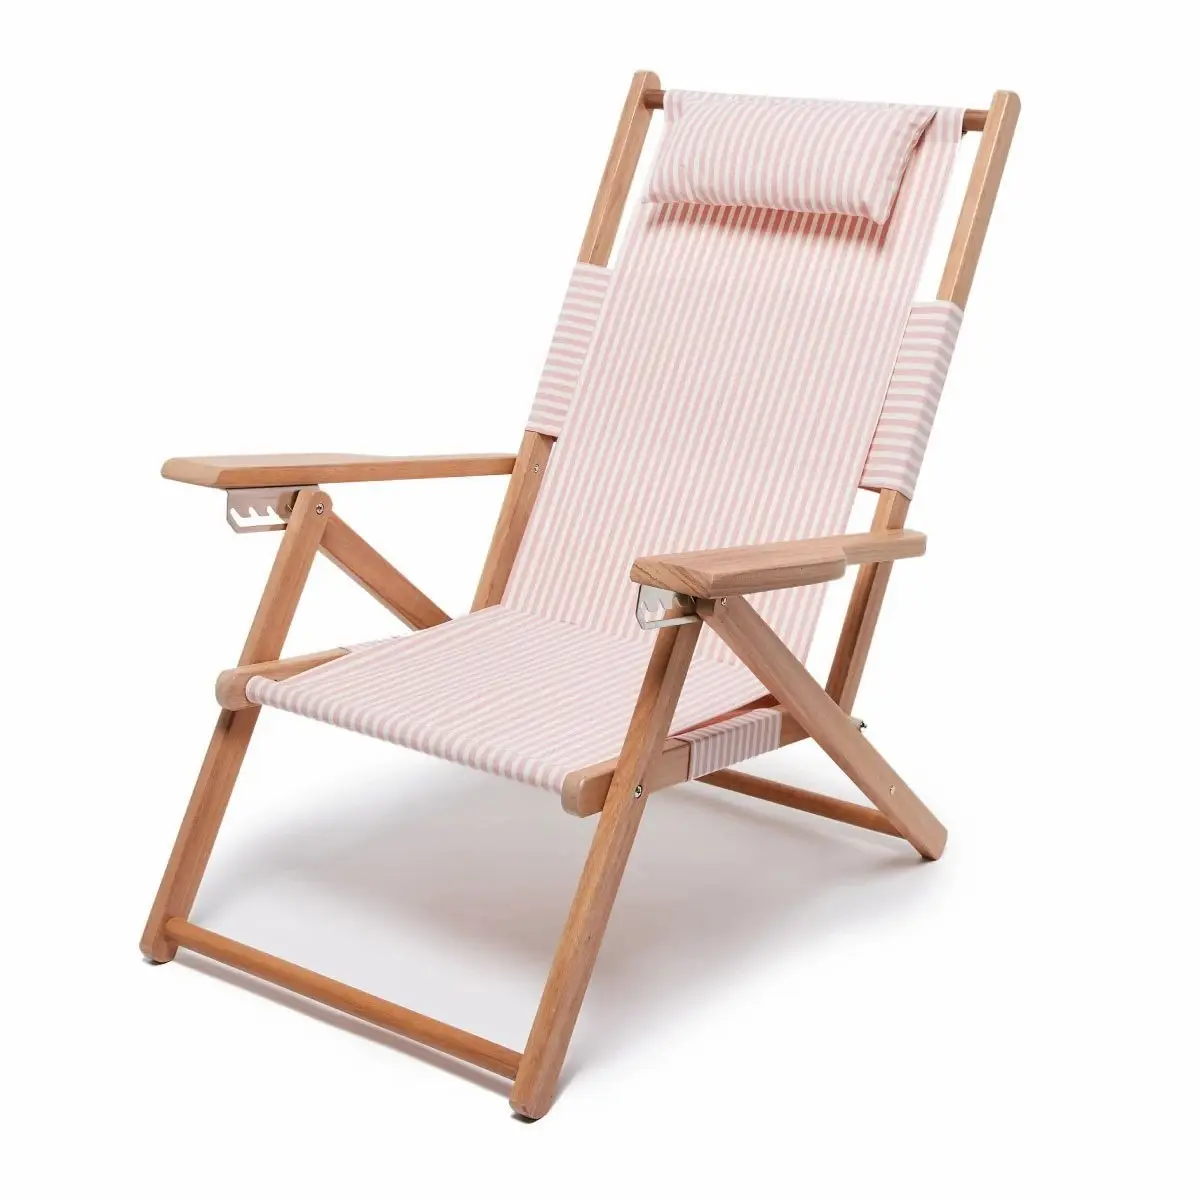 Custom Patterned Oxford Cloth Strong Wooden High Load Beach Chairs Beach Folding Portable Lounge Chairs With Pillow